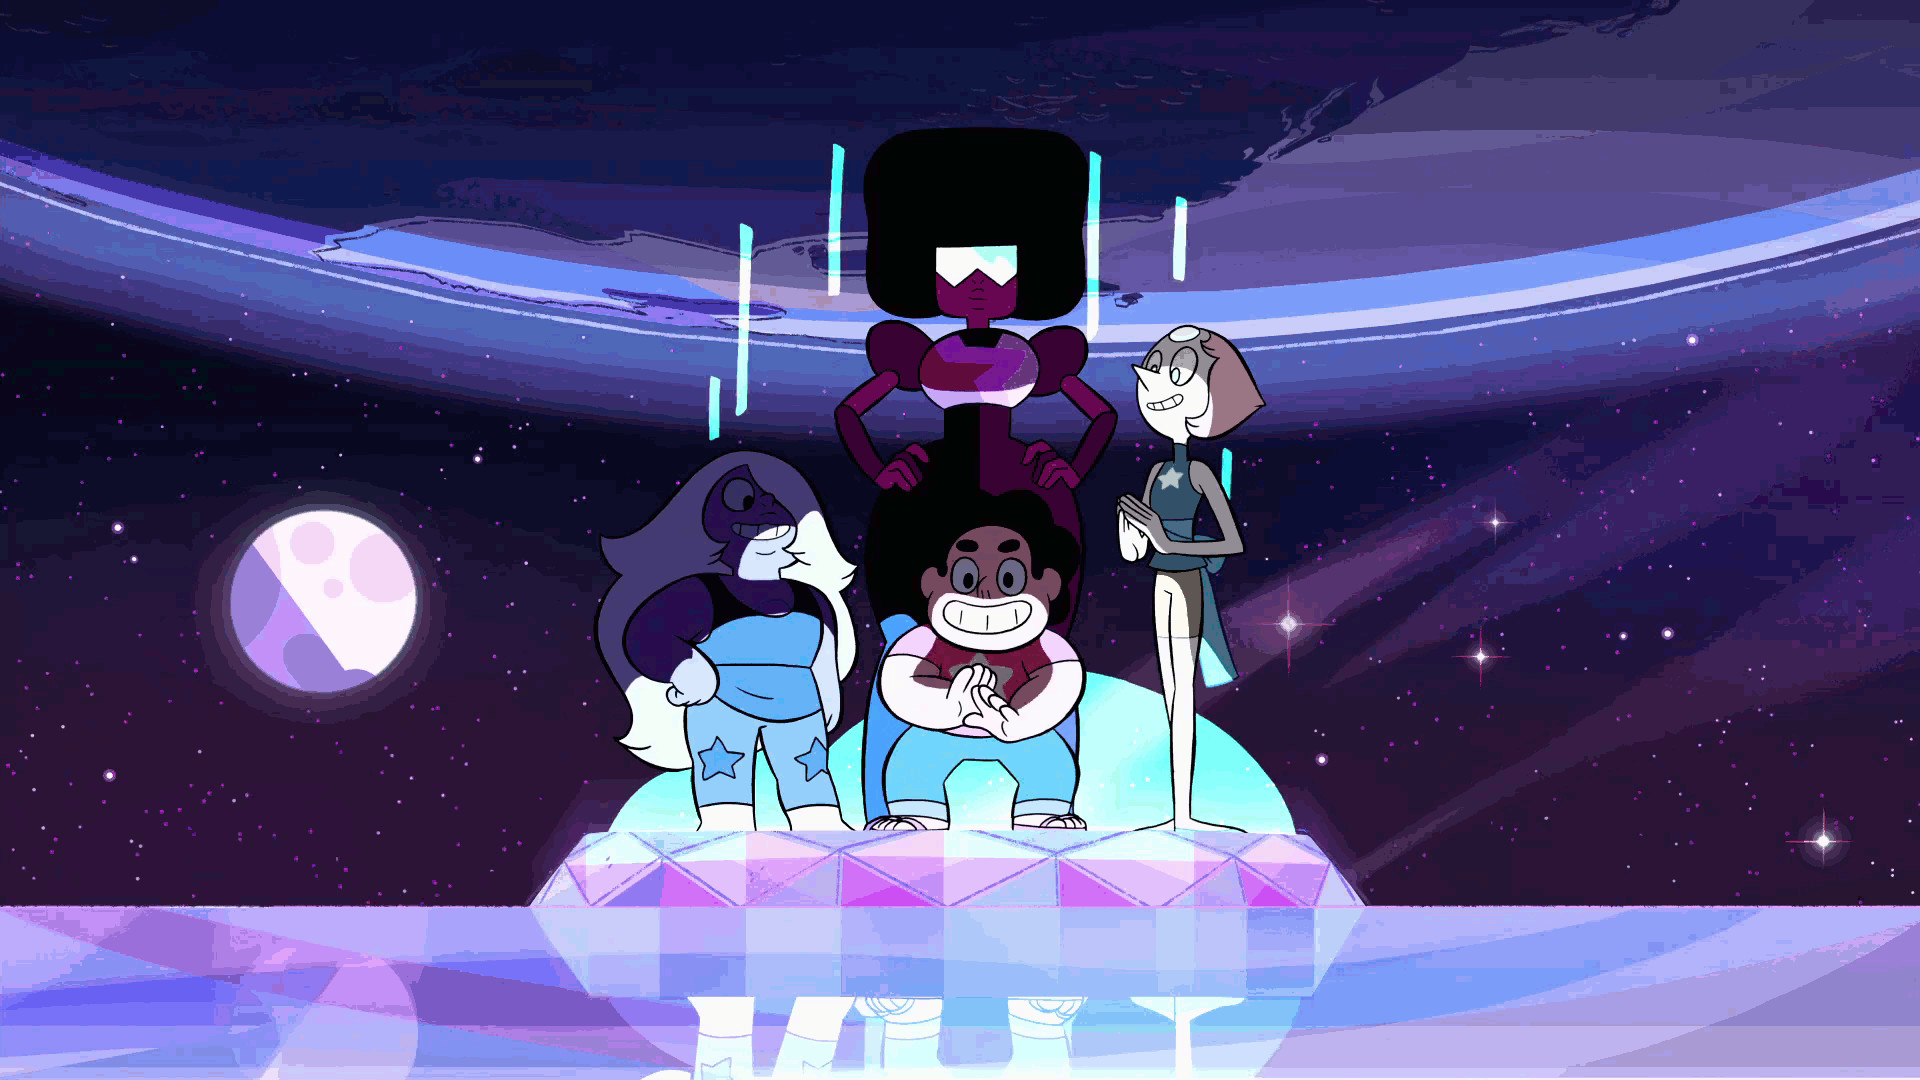 1920x1080 We are the crystal gems!